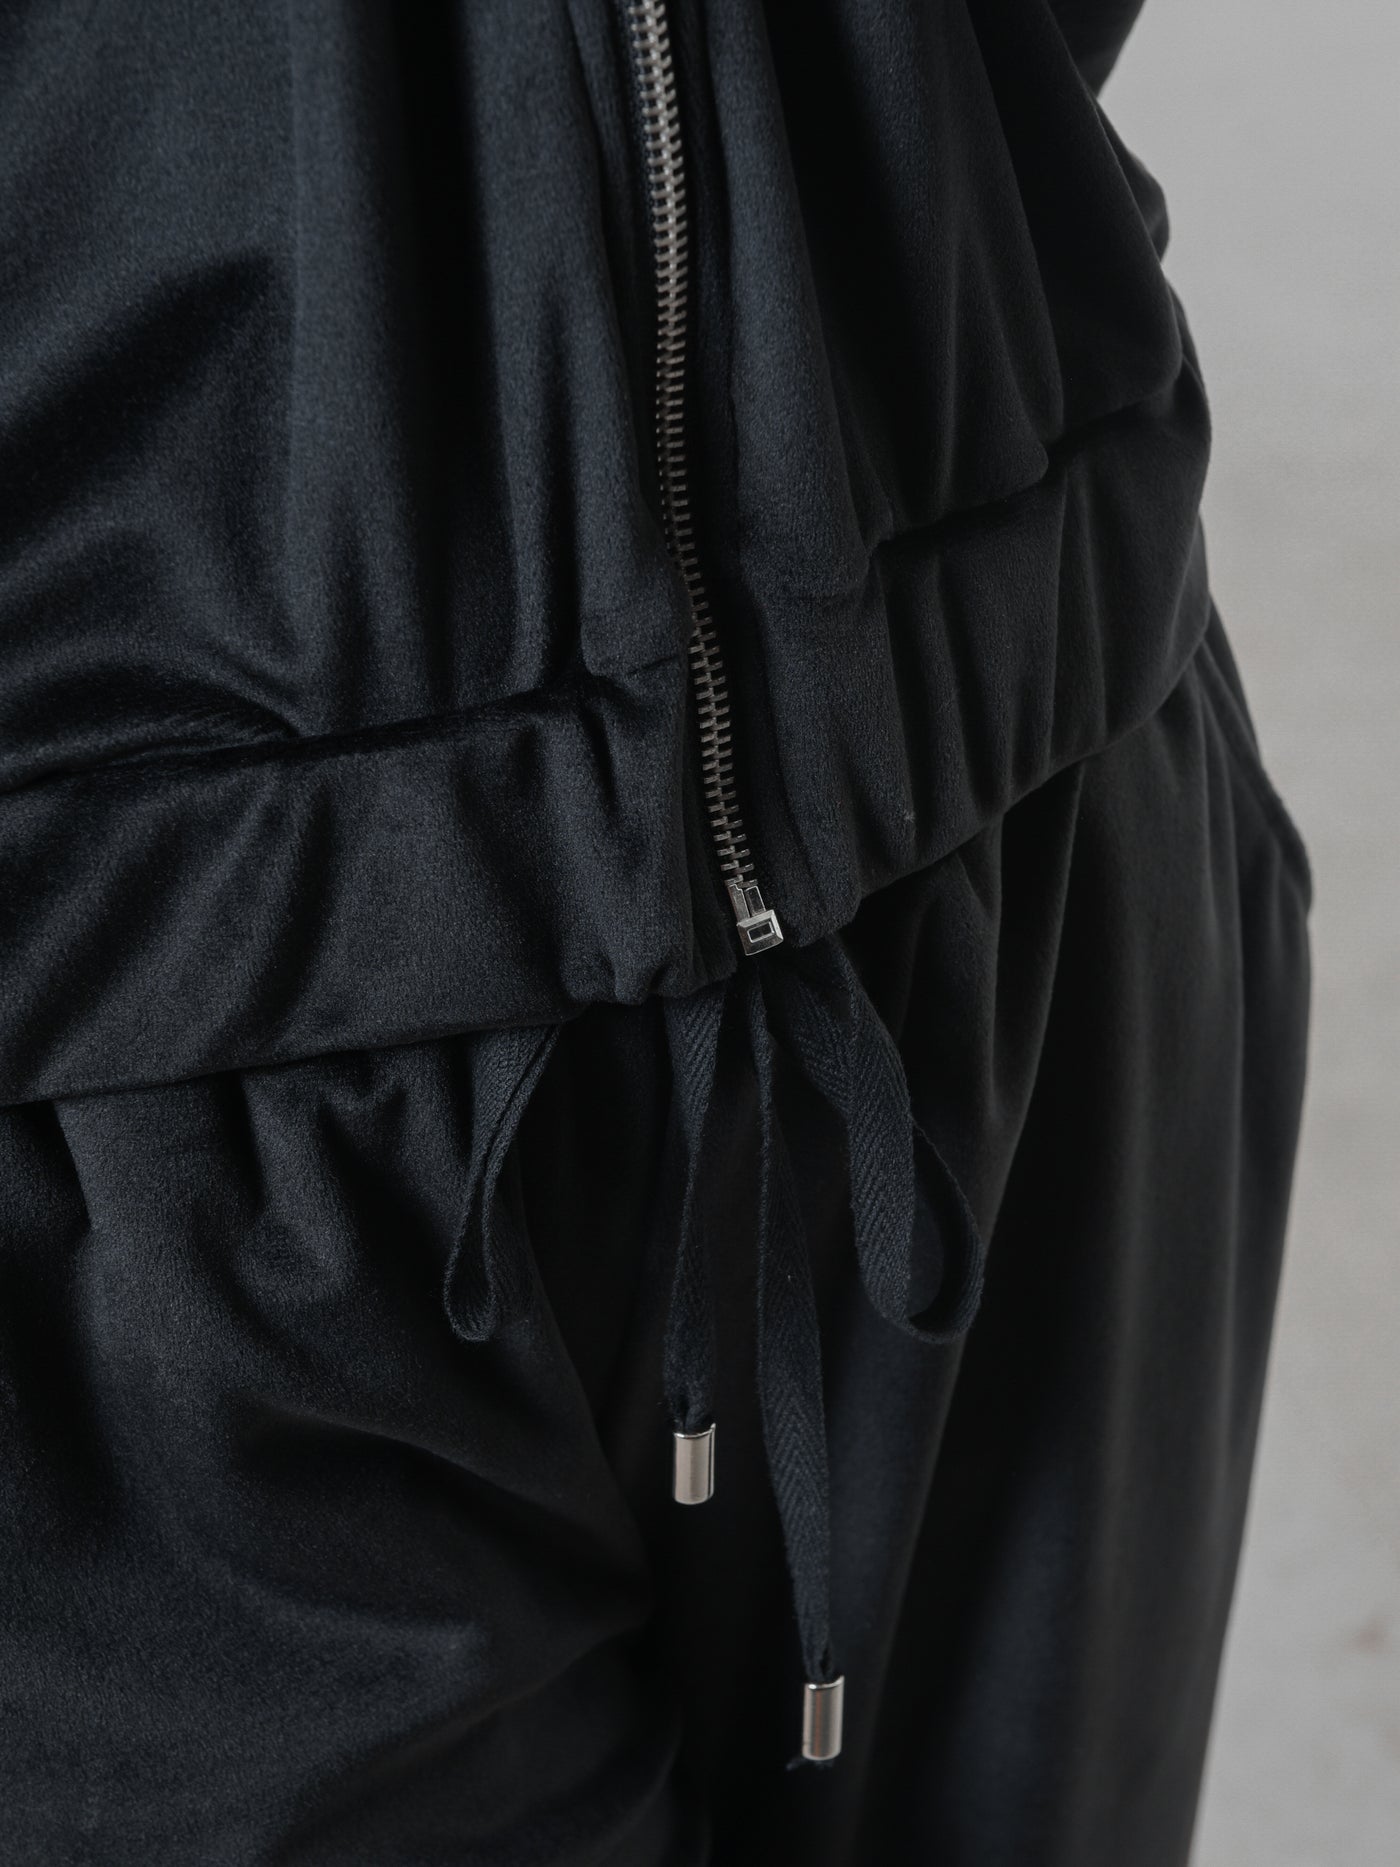 Hooded Top with Zipper